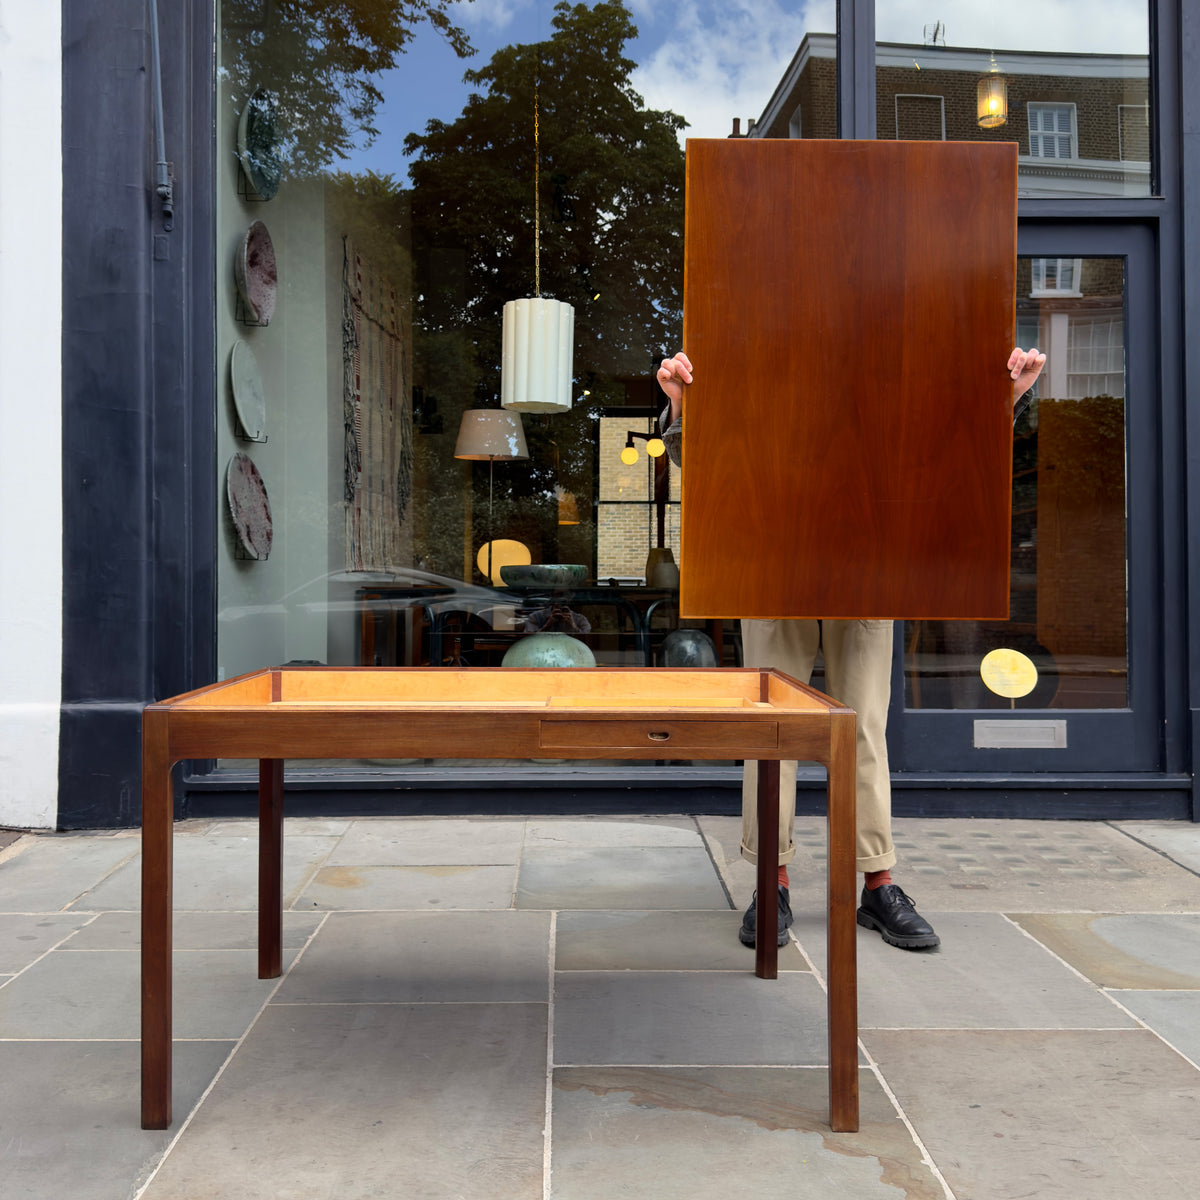 A 1950s Danish drafting table made of mahogany, featuring a reversible top, a drawer, and a central compartment. This piece combines functionality with classic mid-century design.